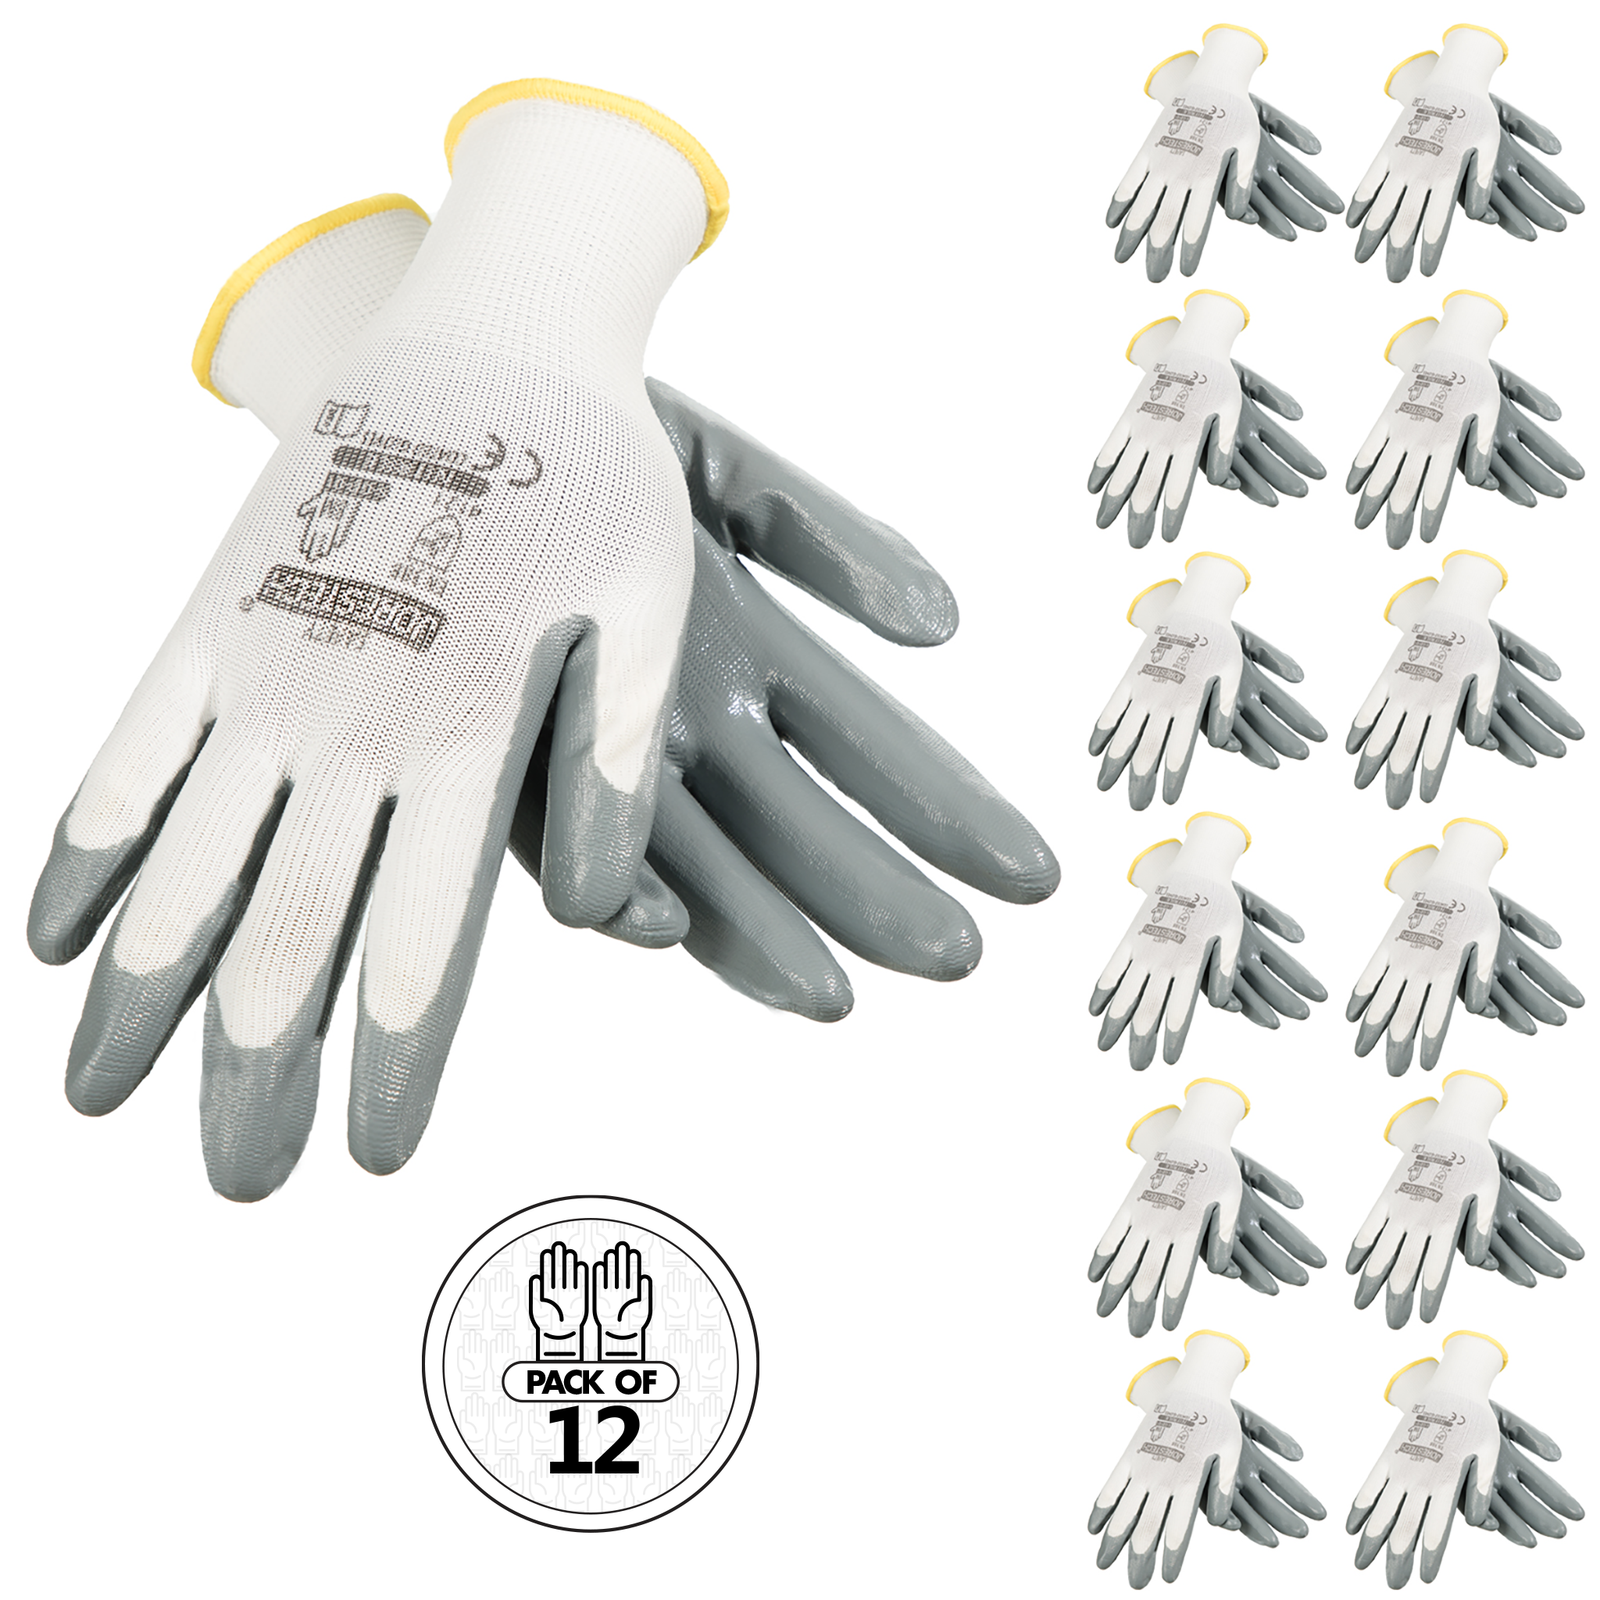 12 pairs of white and gray safety work gloves with nitrile dipped palms